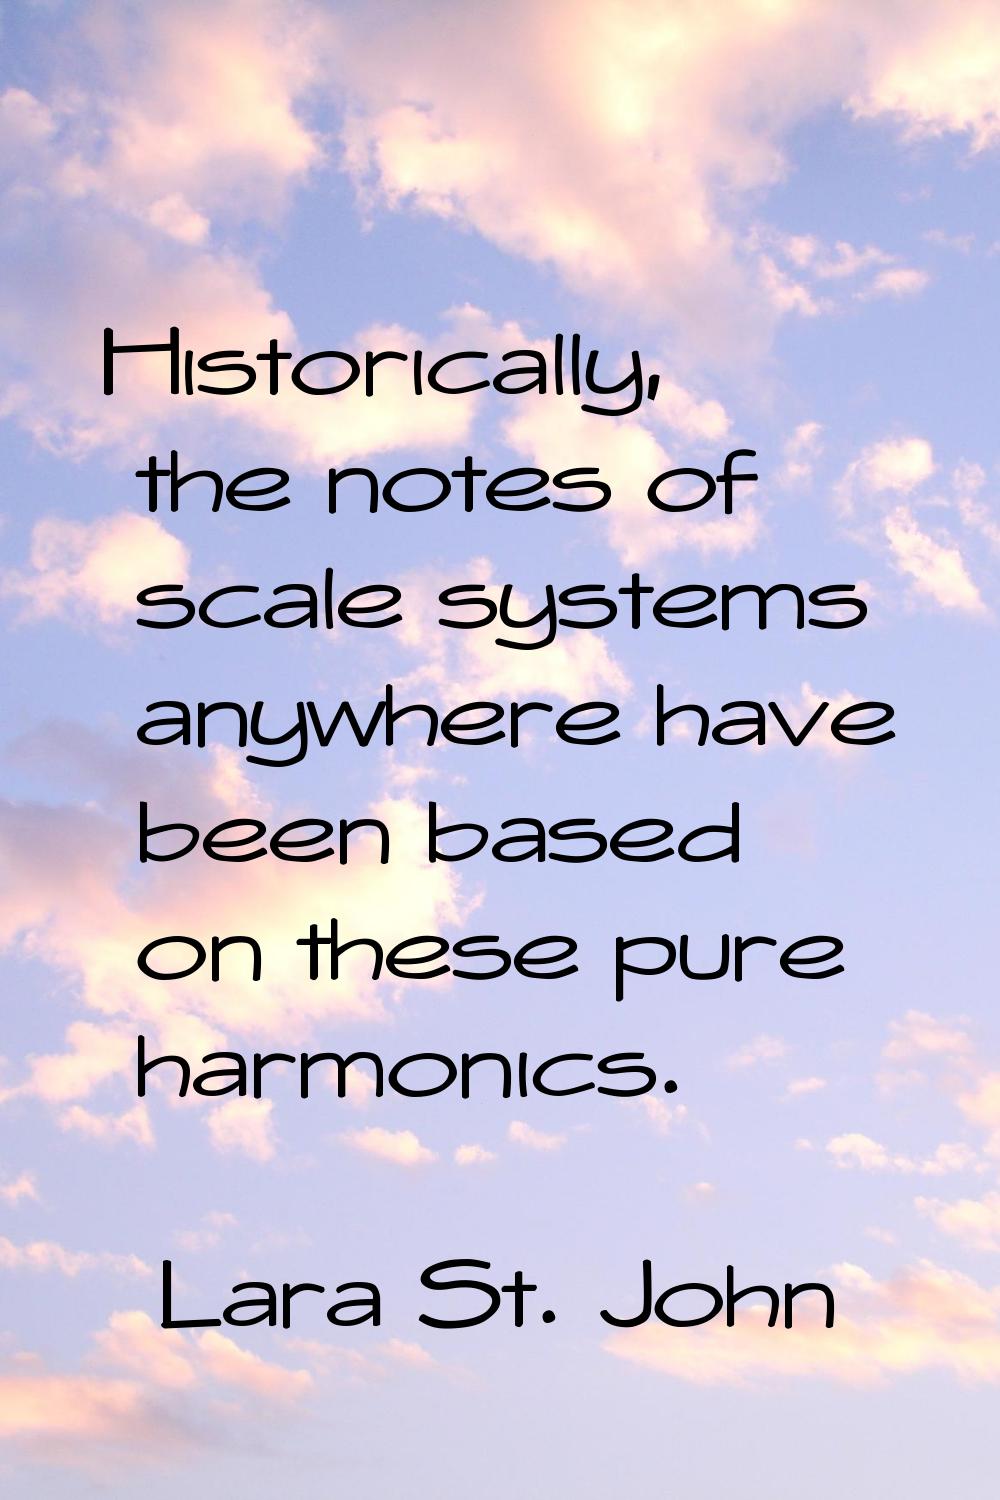 Historically, the notes of scale systems anywhere have been based on these pure harmonics.